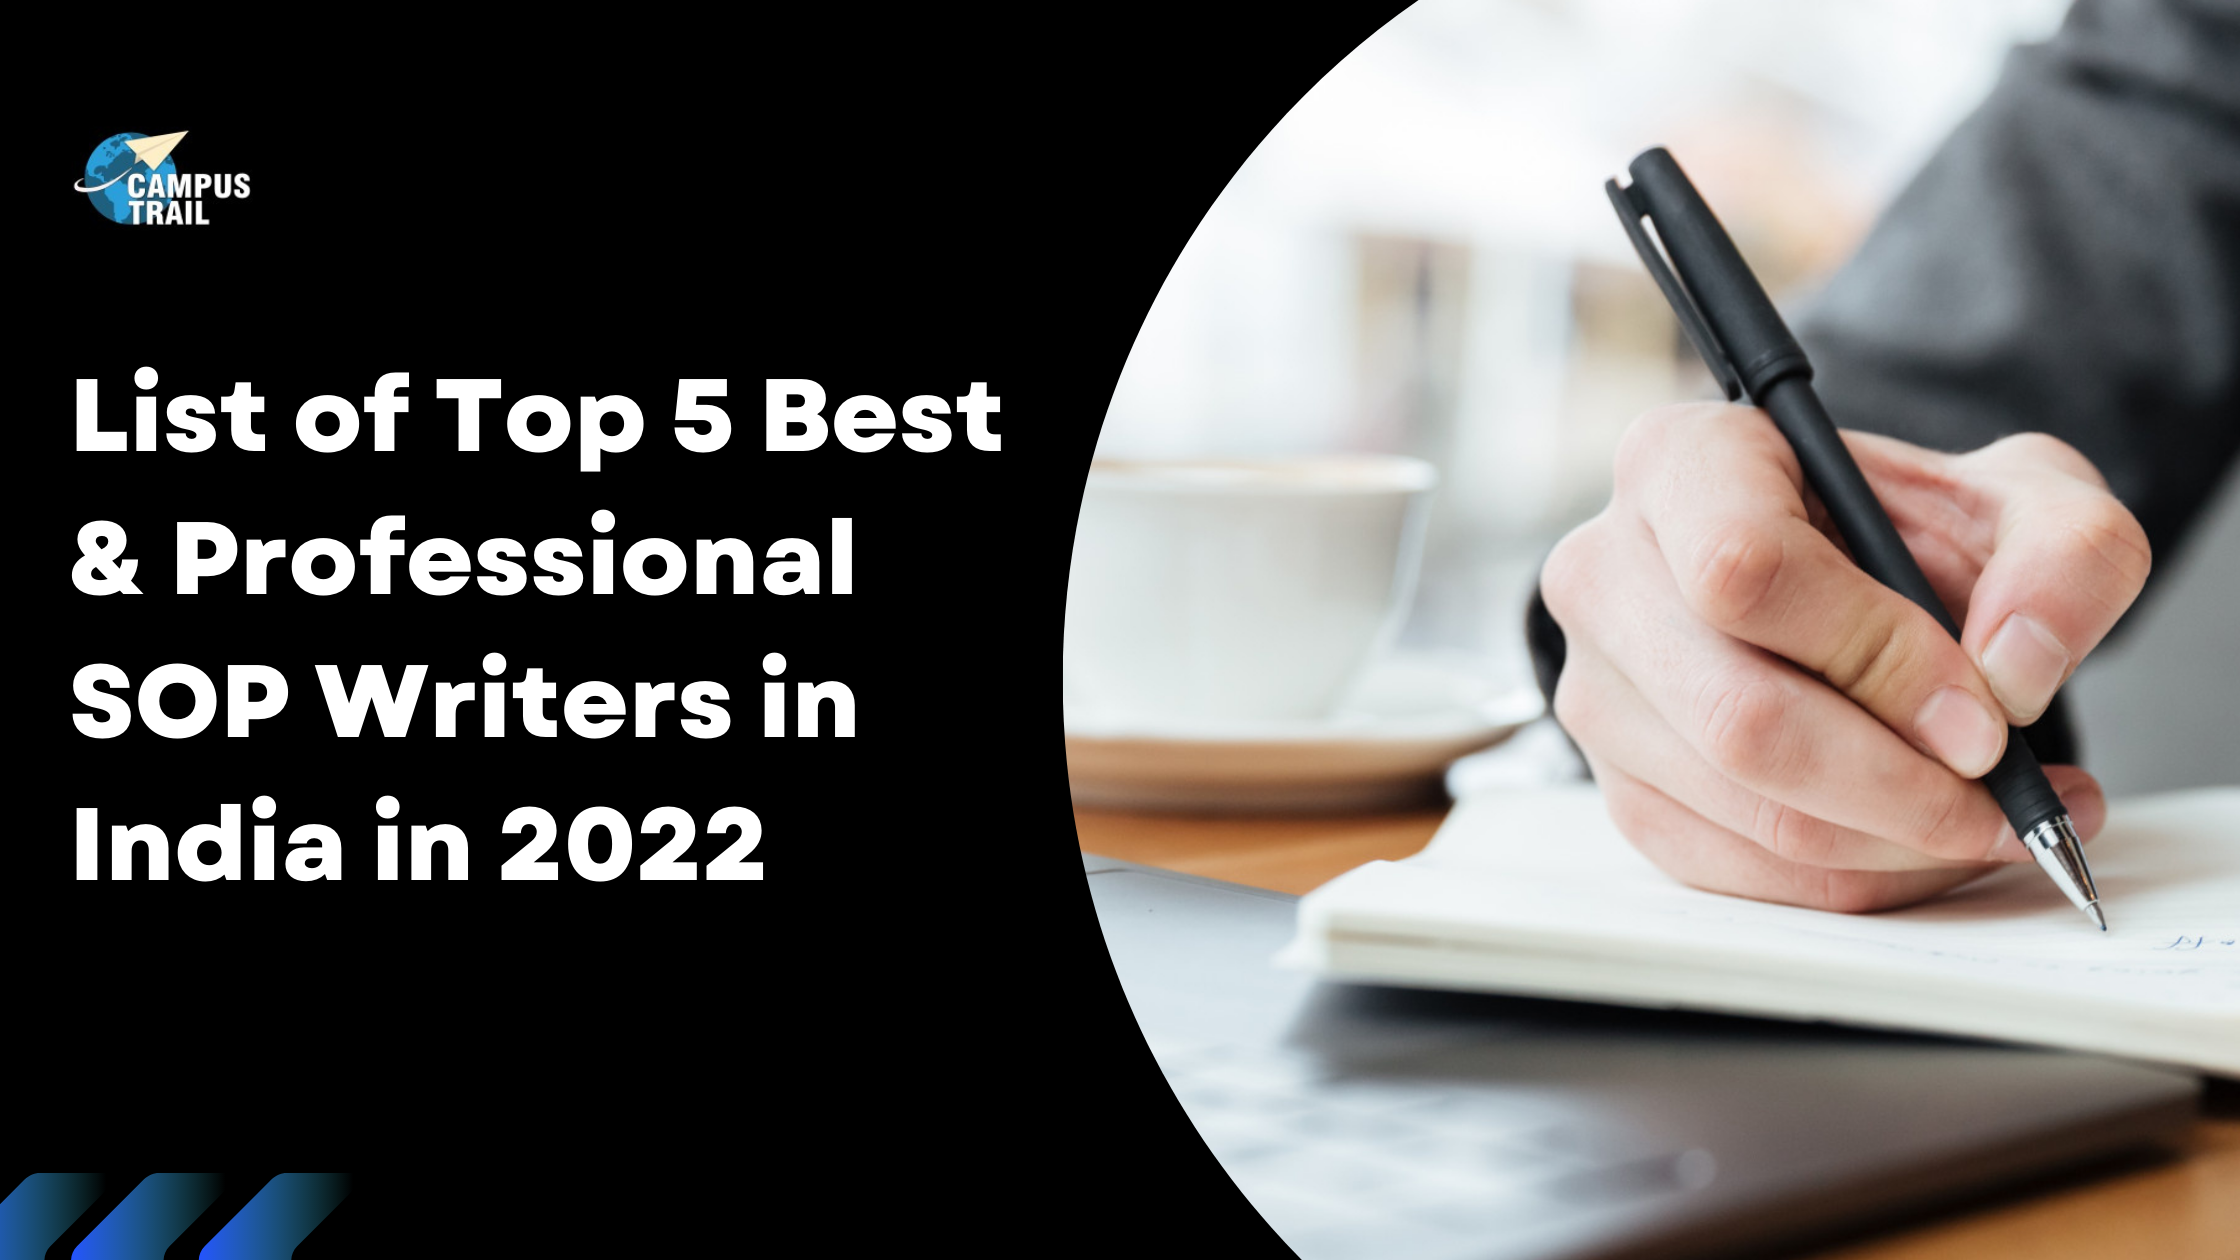 You are currently viewing List of Top 5 Best & Professional SOP Writers in India in 2022